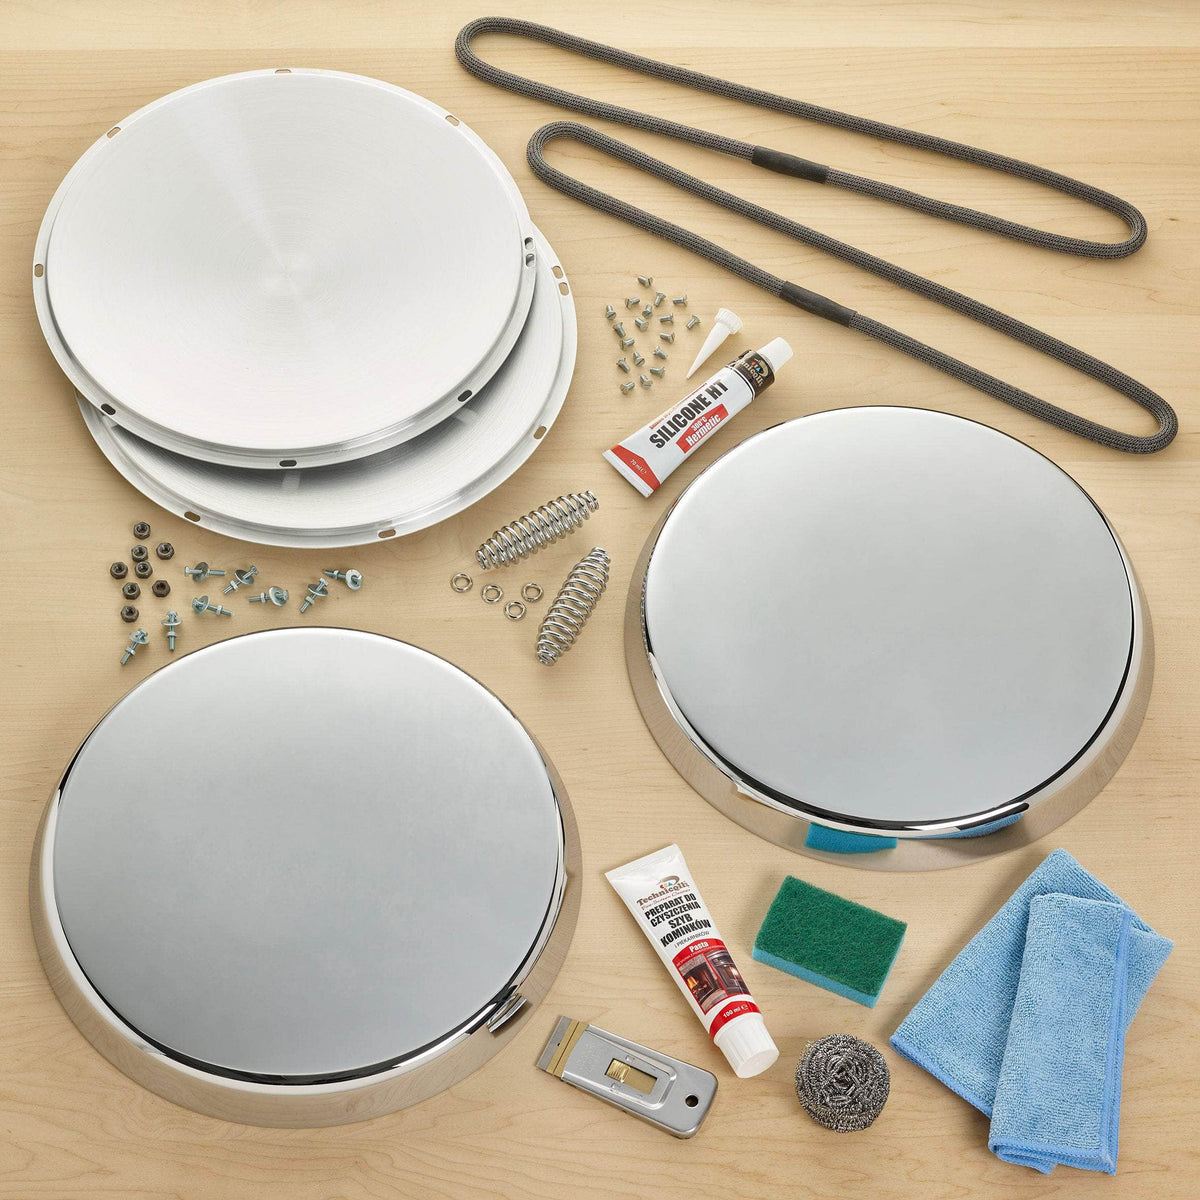 Complete Aluminium Lid Refurb Kit for use with Aga range cookers Deep chrome tops (4cm) / 90mm to fit all Aga range cookers made pre-1994